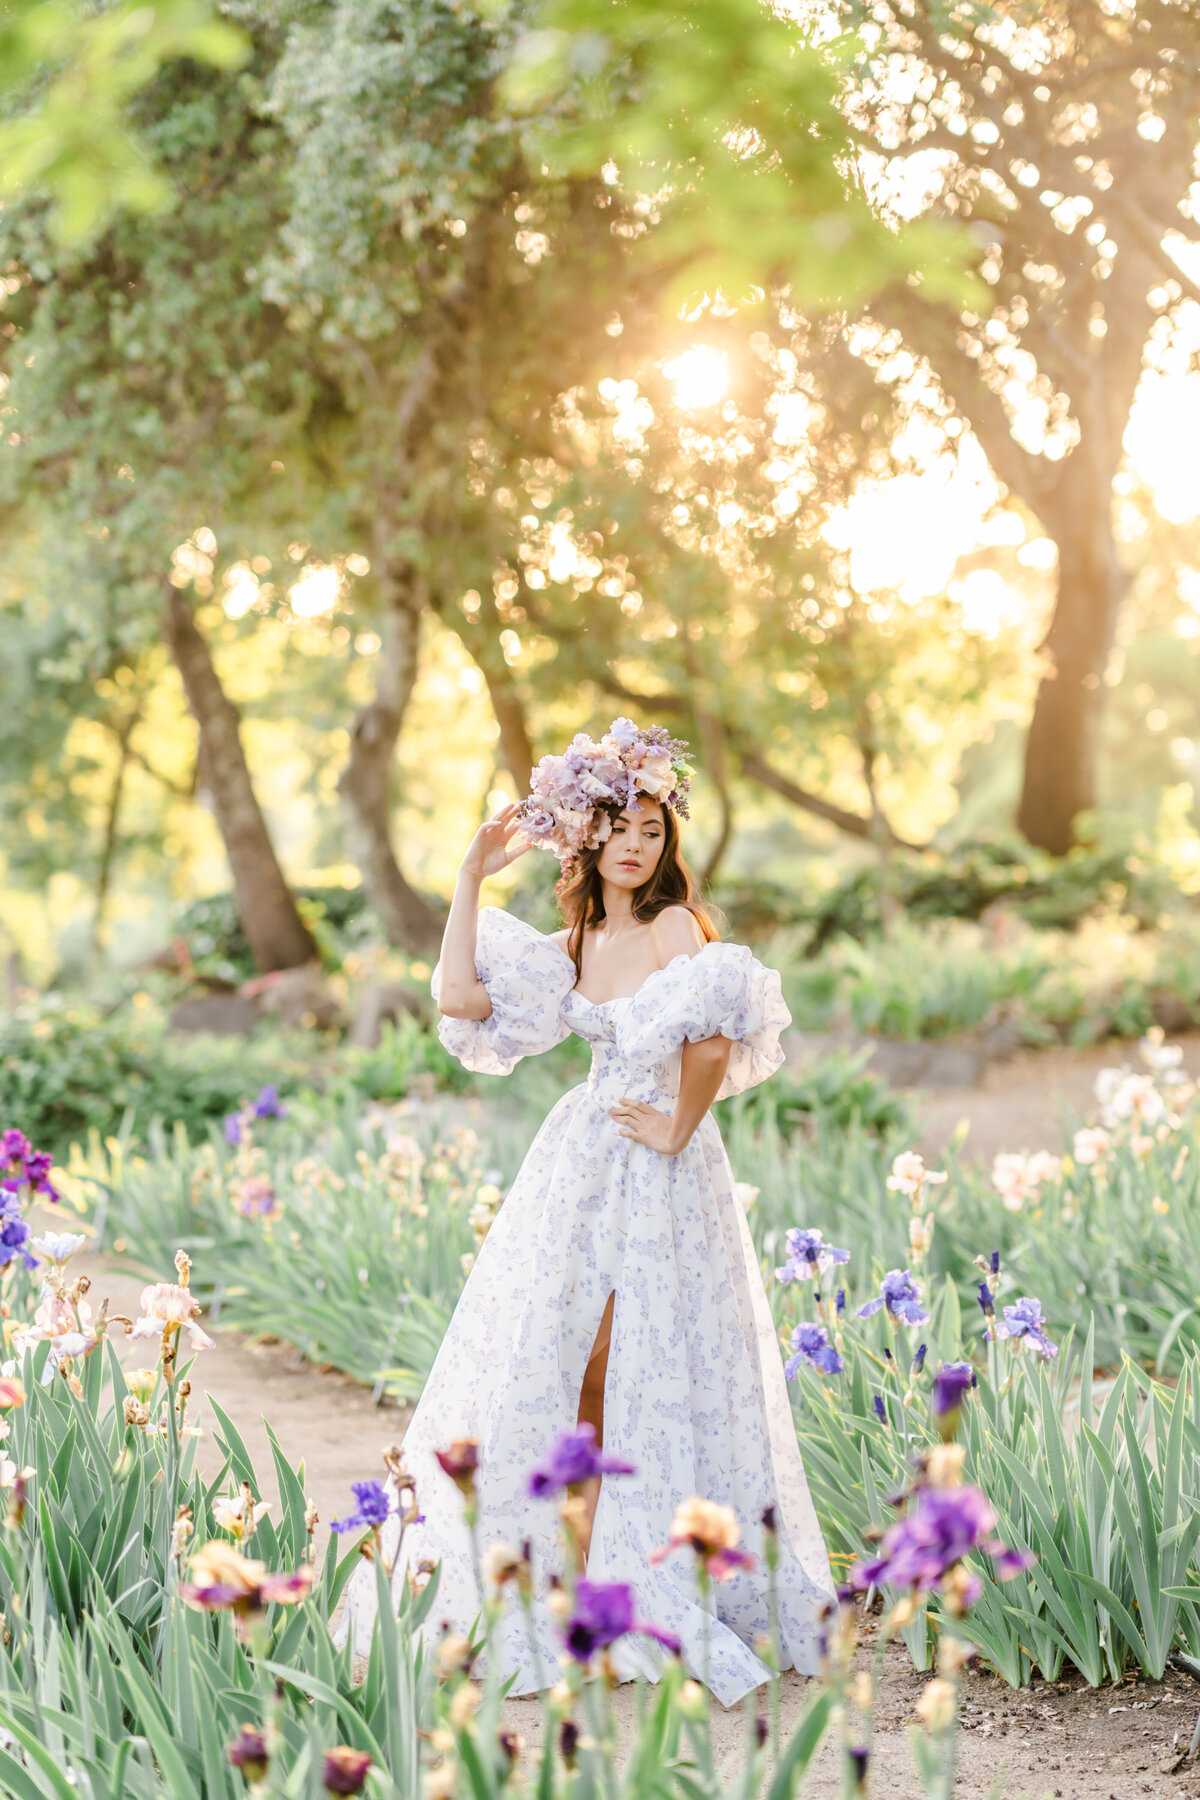 A portrait session photographed by Bay Area Photographer, Light Livin Photography shows a woman posing in a field of lupine flowers.